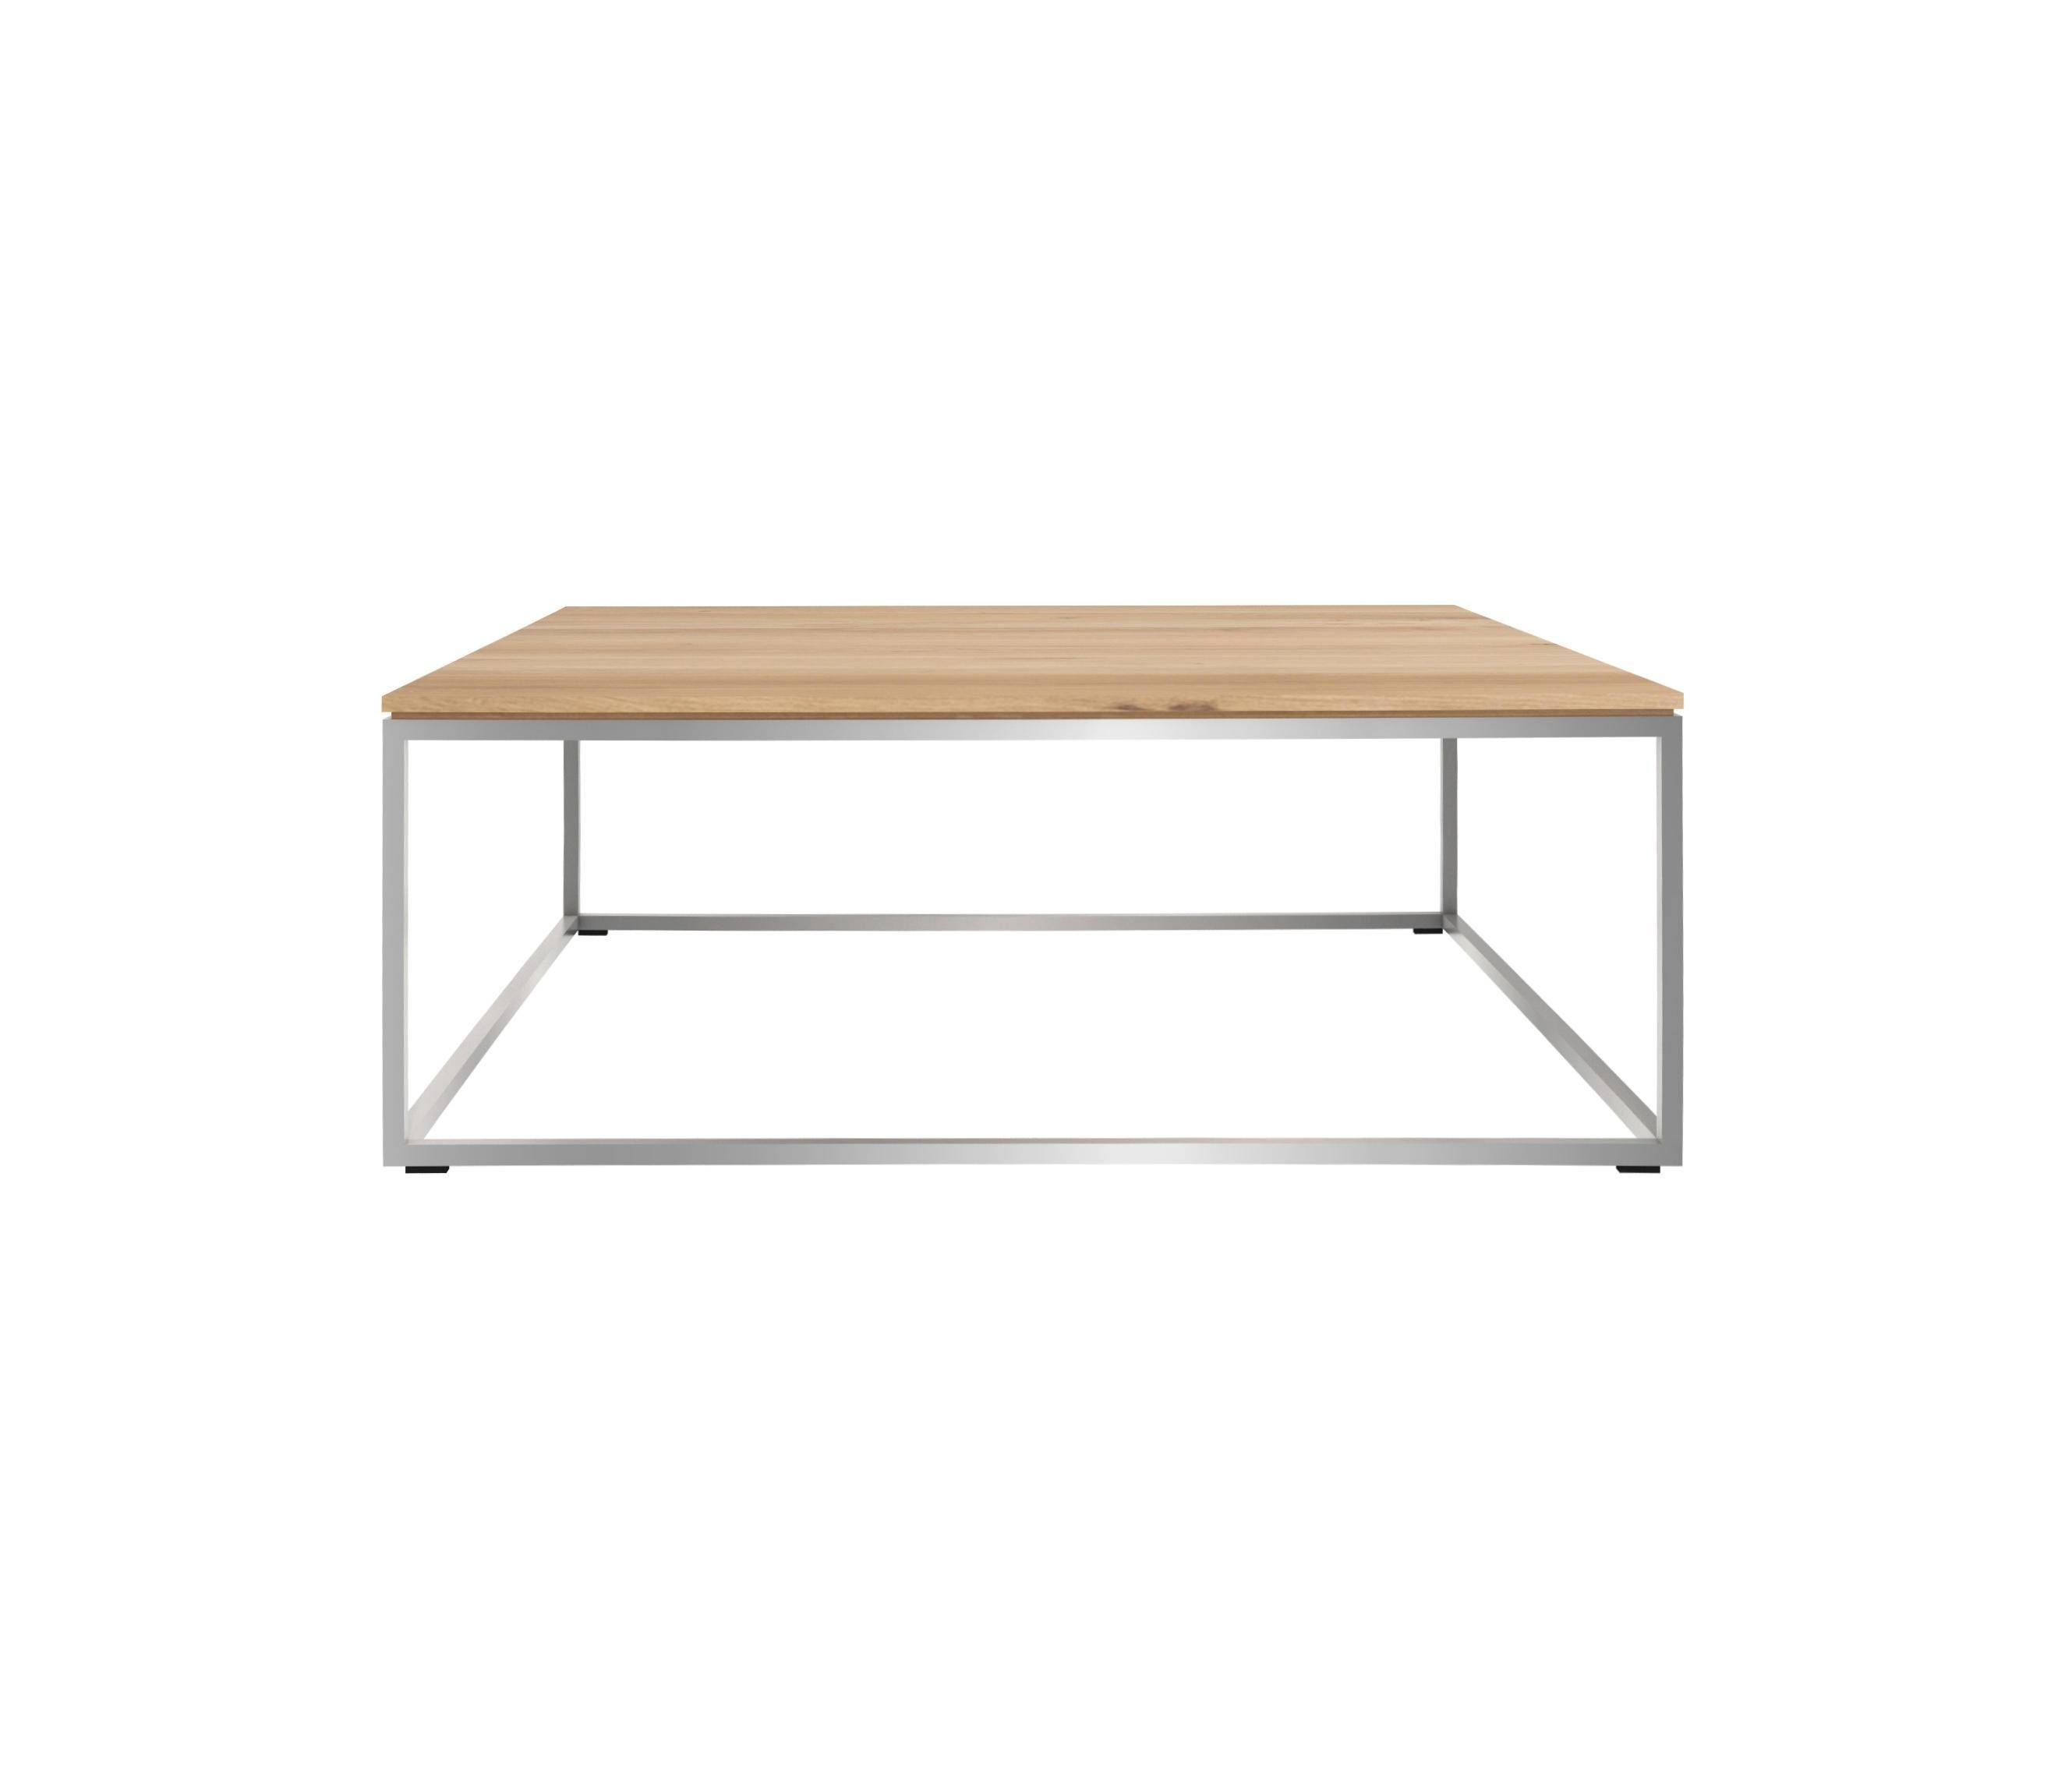 Oak Thin Coffee Table – Lounge Tables From Ethnicraft | Architonic Regarding Thin Coffee Tables (View 6 of 30)